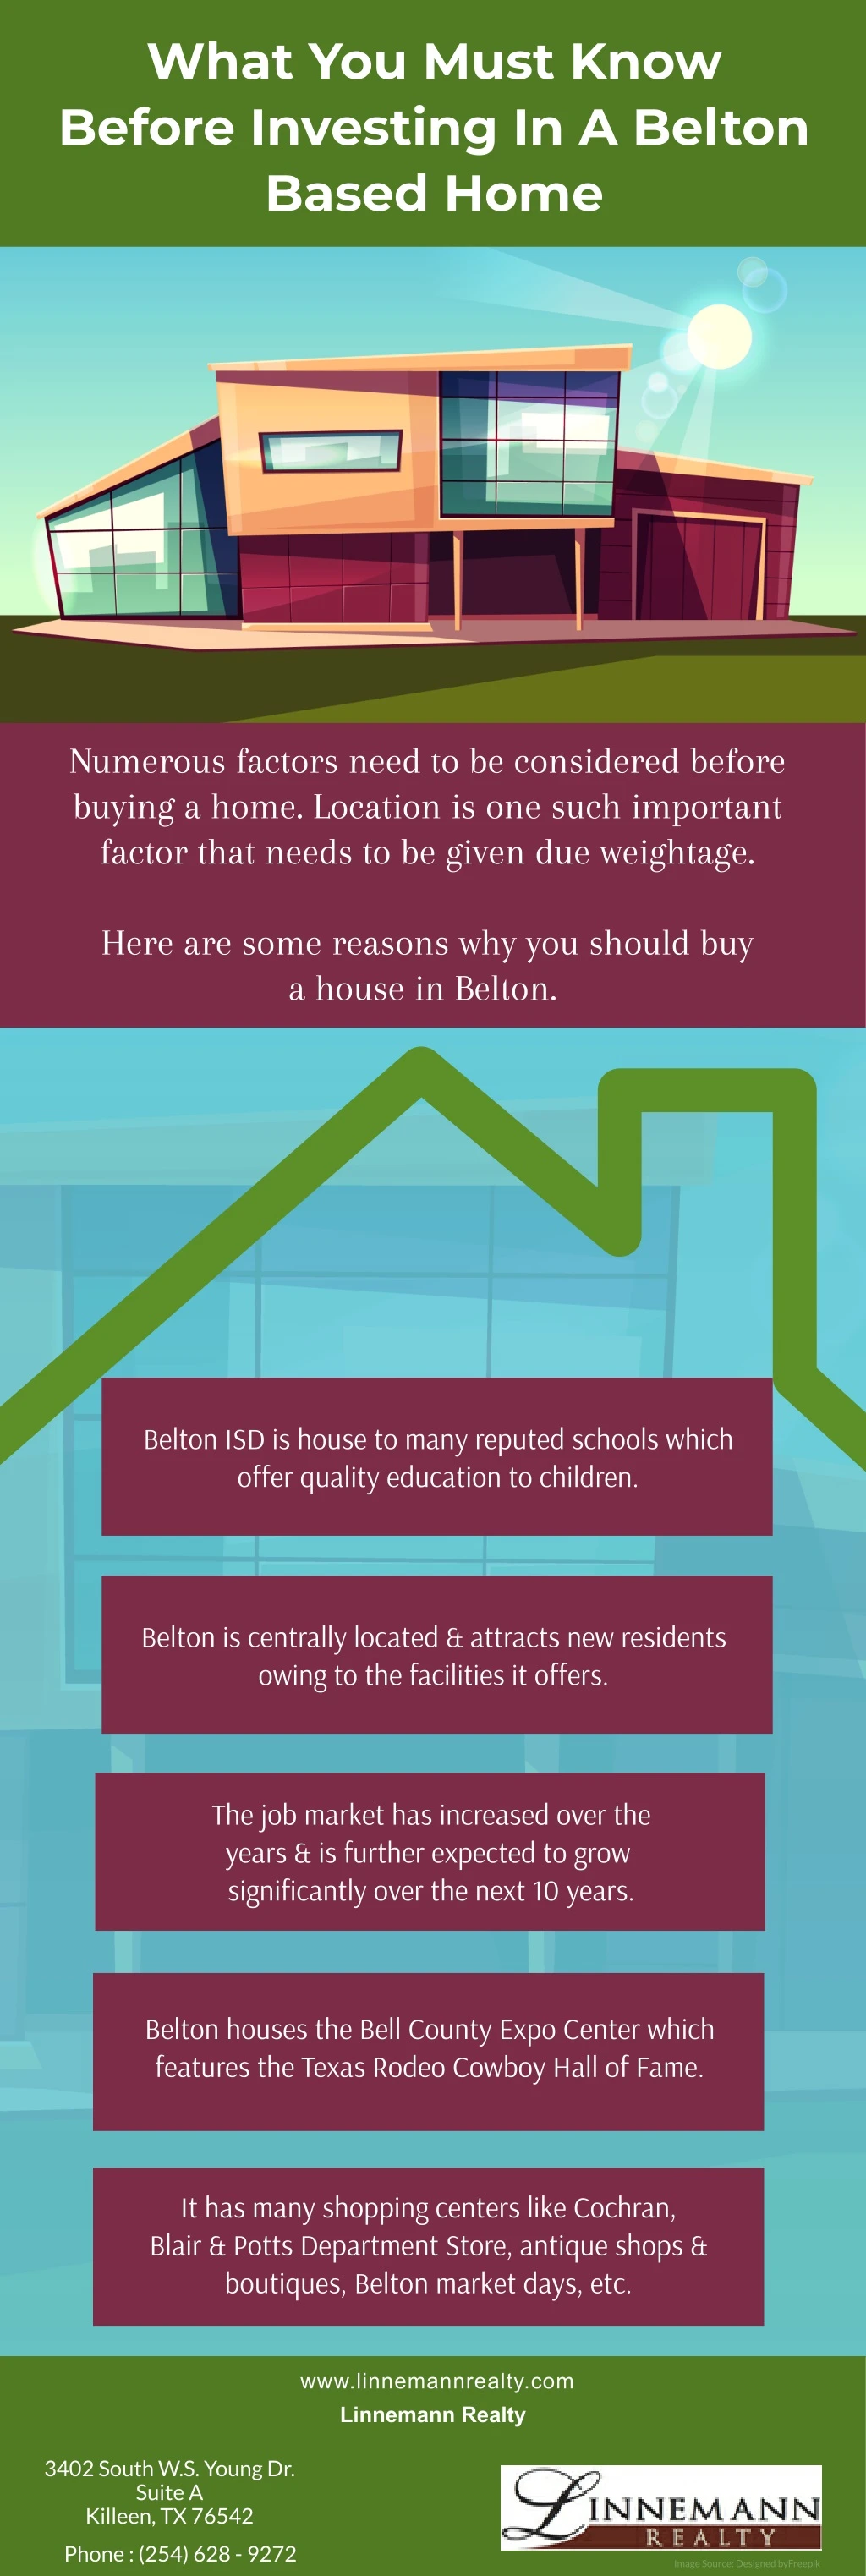 what you must know before investing in a belton